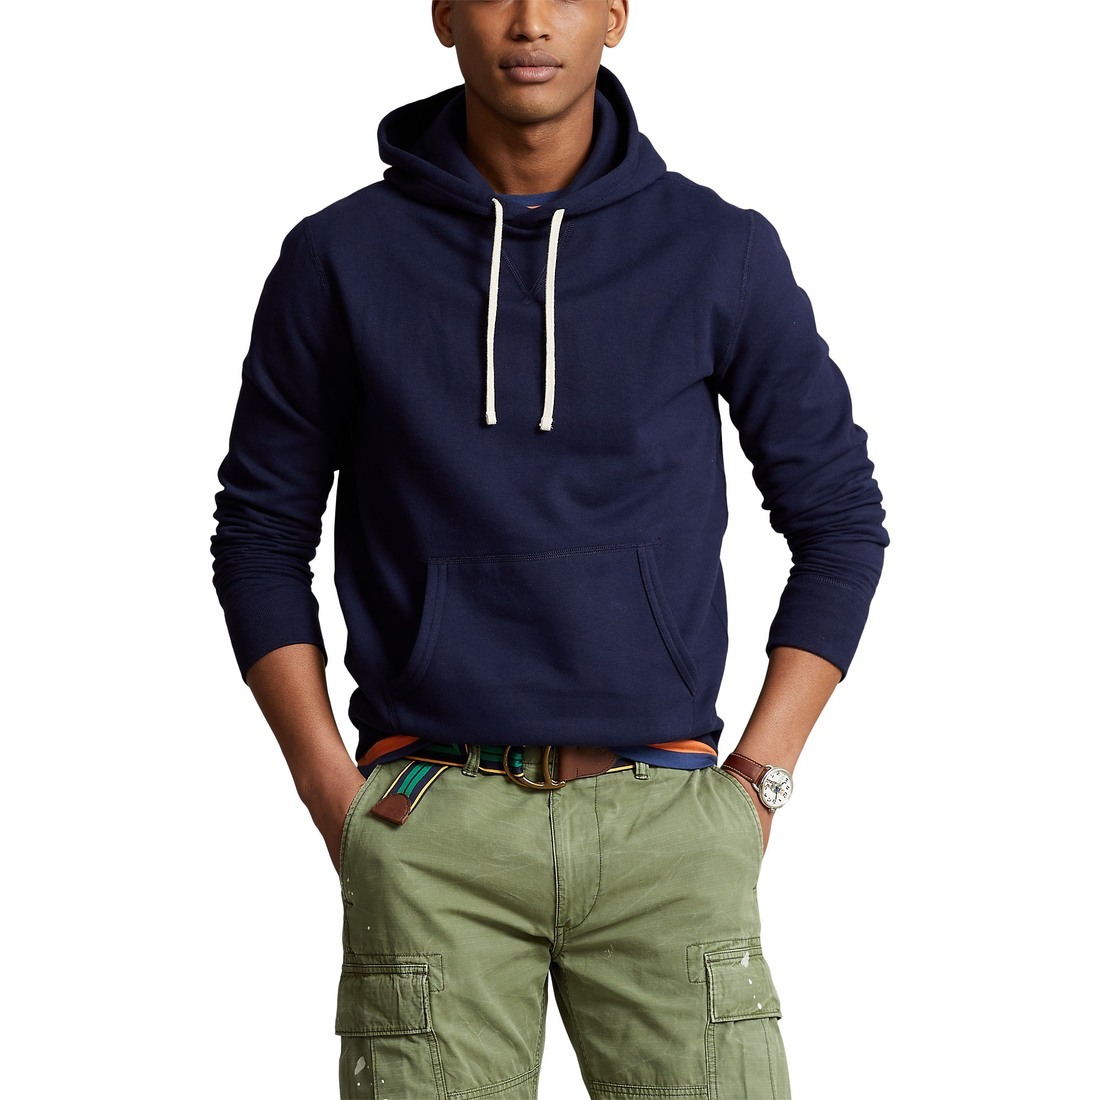 Men's Personalized Print Hooded Long Sleeve Sweatshirt And Trousers Set